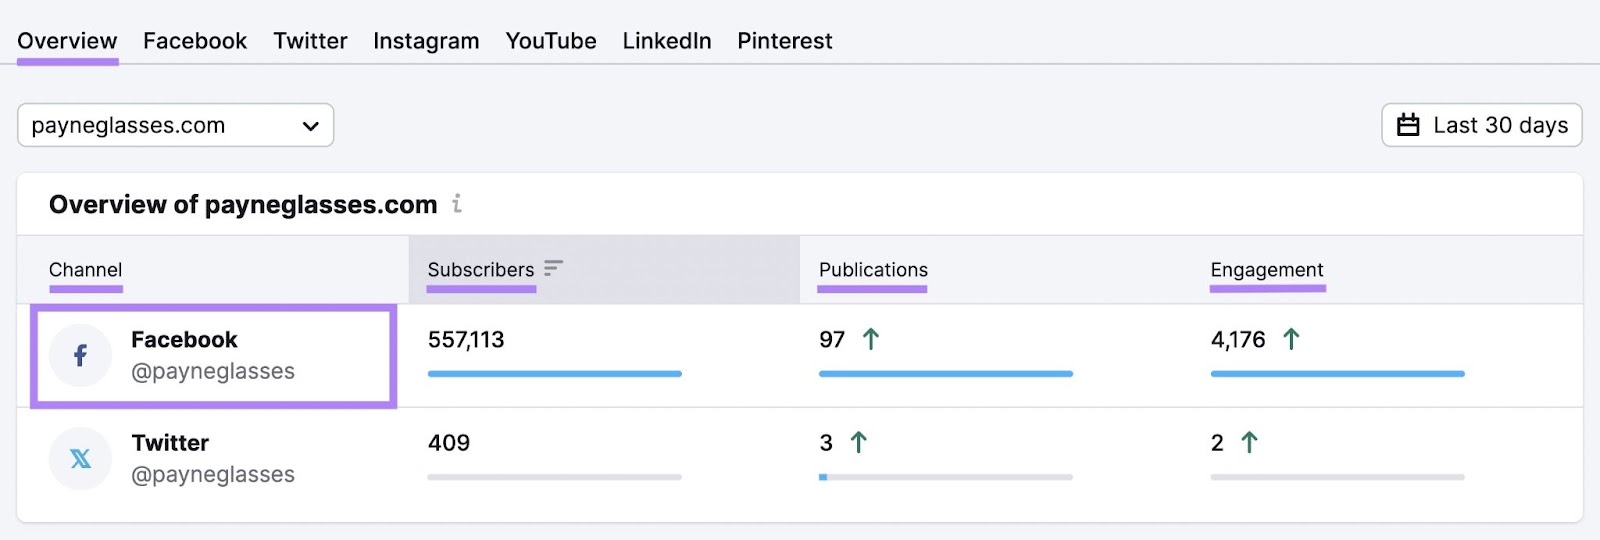 Facebook subscribers, publications, and engagement overview shown for "payneglasses.com" in Social Tracker tool